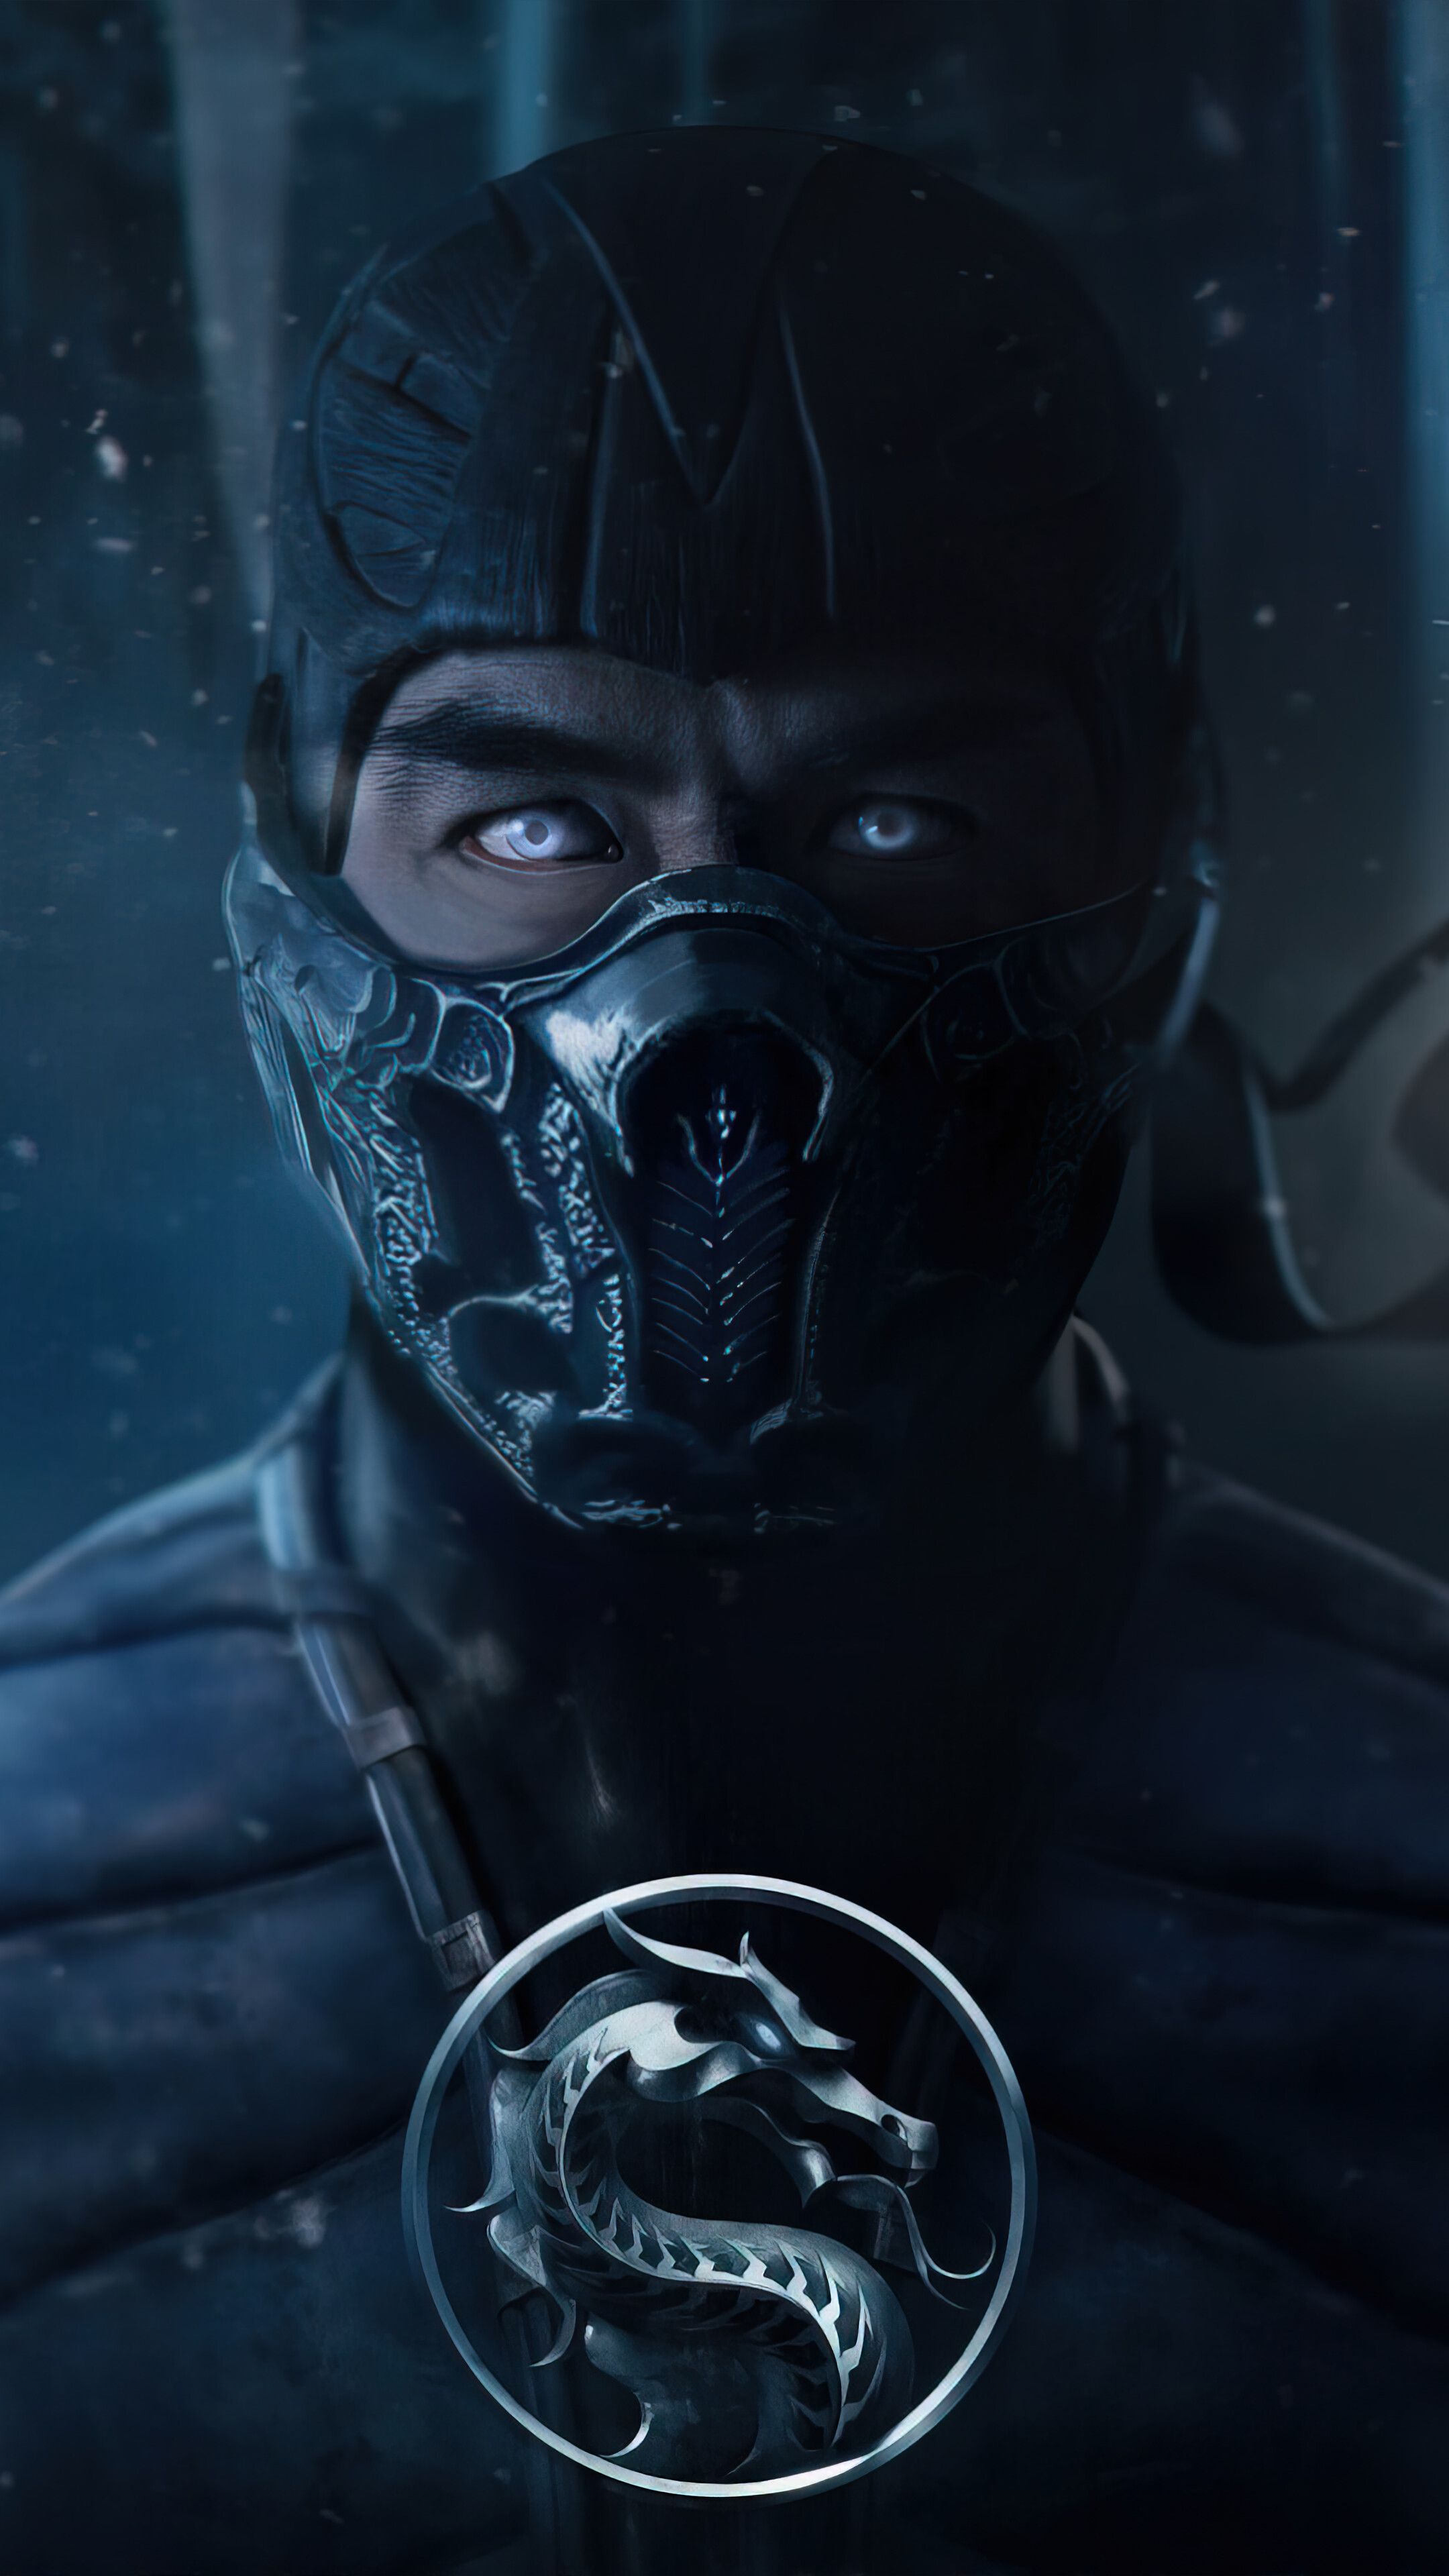 Mortal Kombat 2021 Wallpaper Kombat 2021 Photo Gallery Imdb, We hope you enjoy our variety and growing collection of HD image to use as a background or home screen